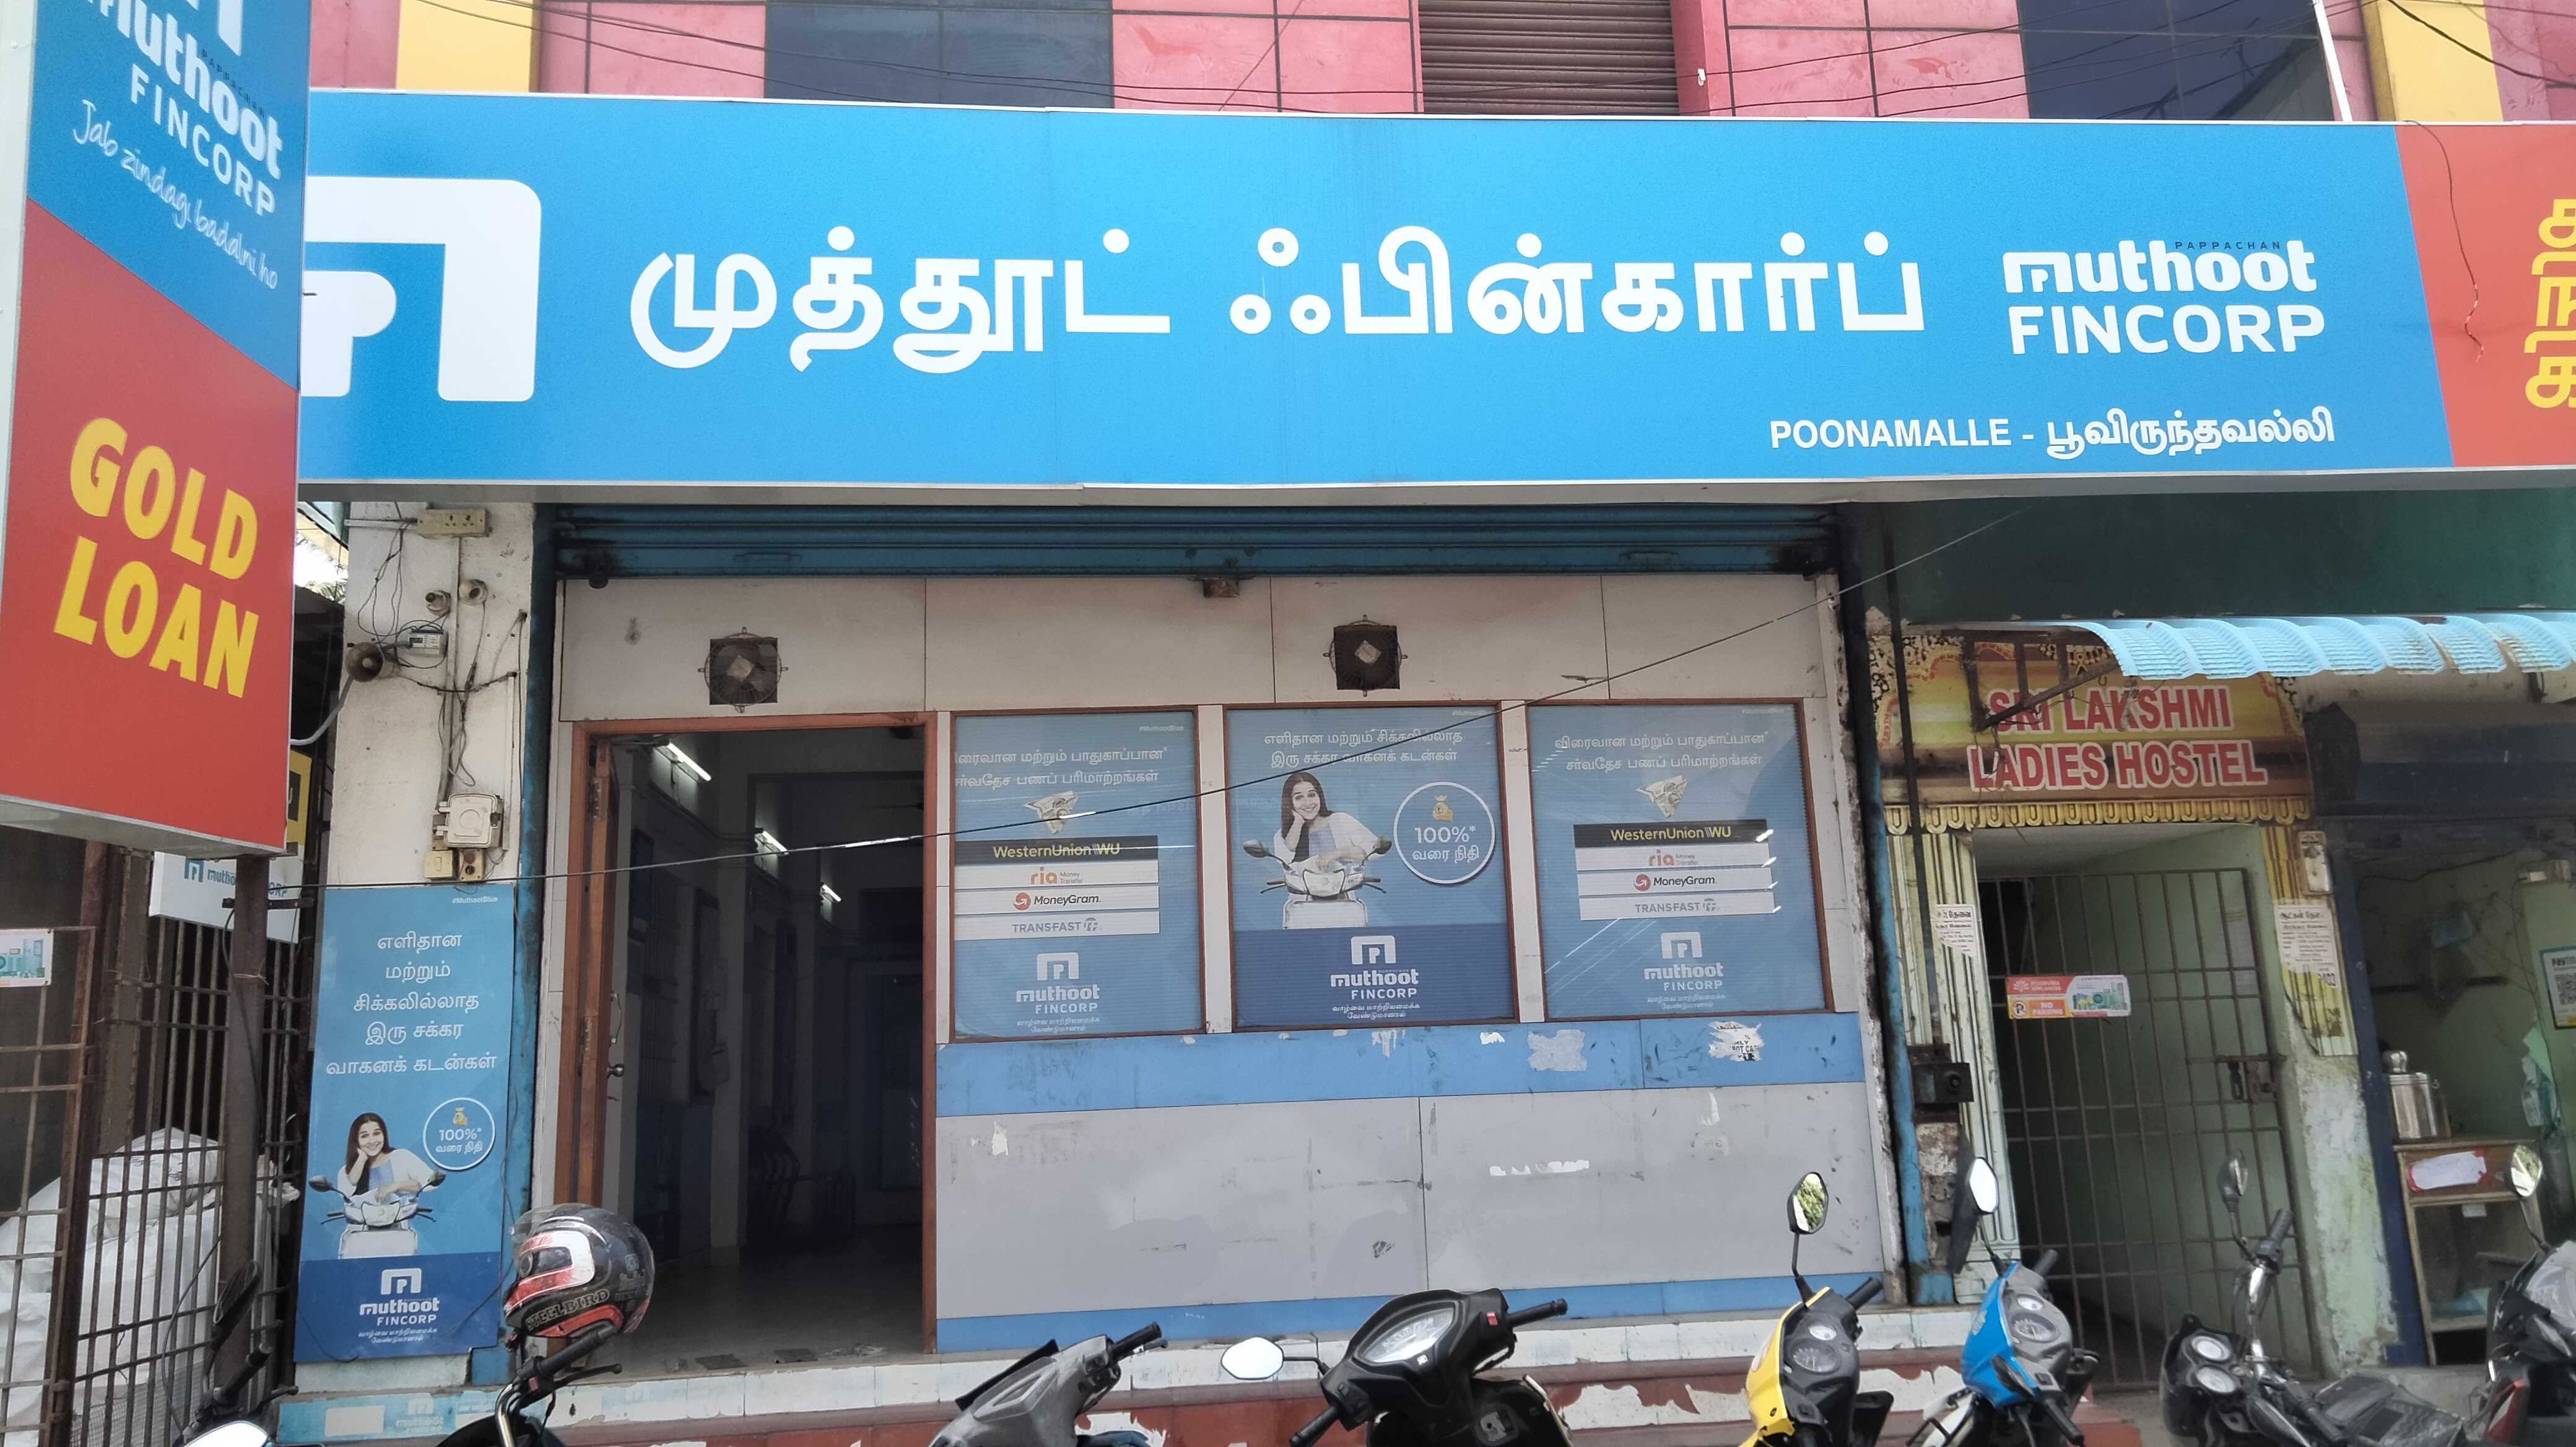 Photos and Videos of Muthoot Fincorp Gold Loan in Poonamallee, Chennai